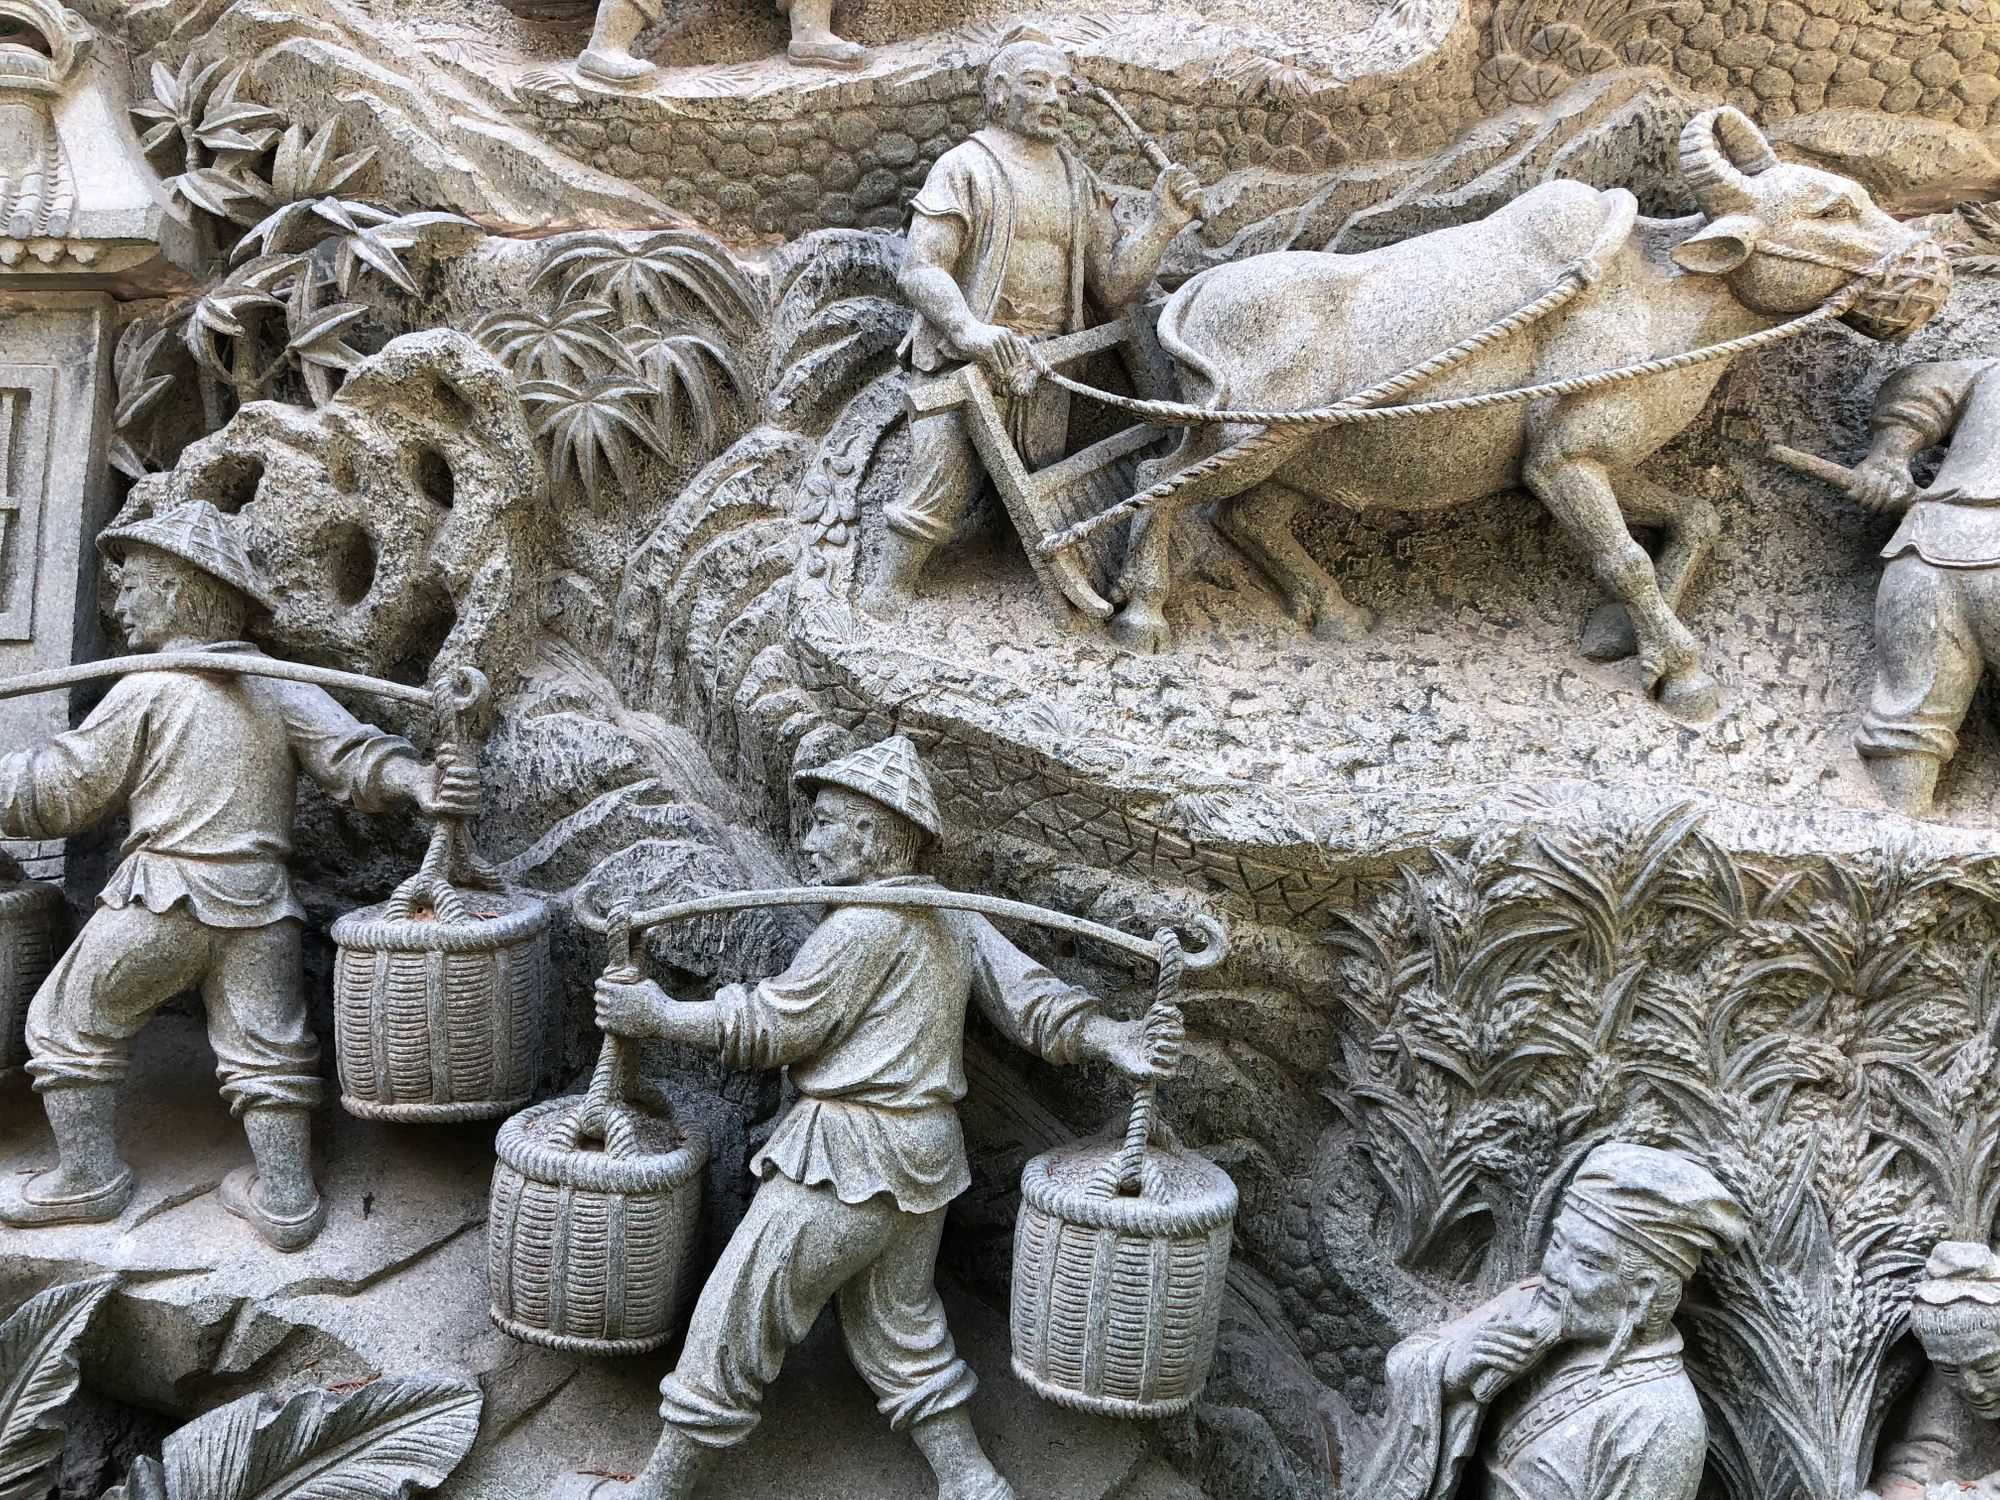 Amazingly detailed stone sculpture depicting traditional Chinese story (Image by author)